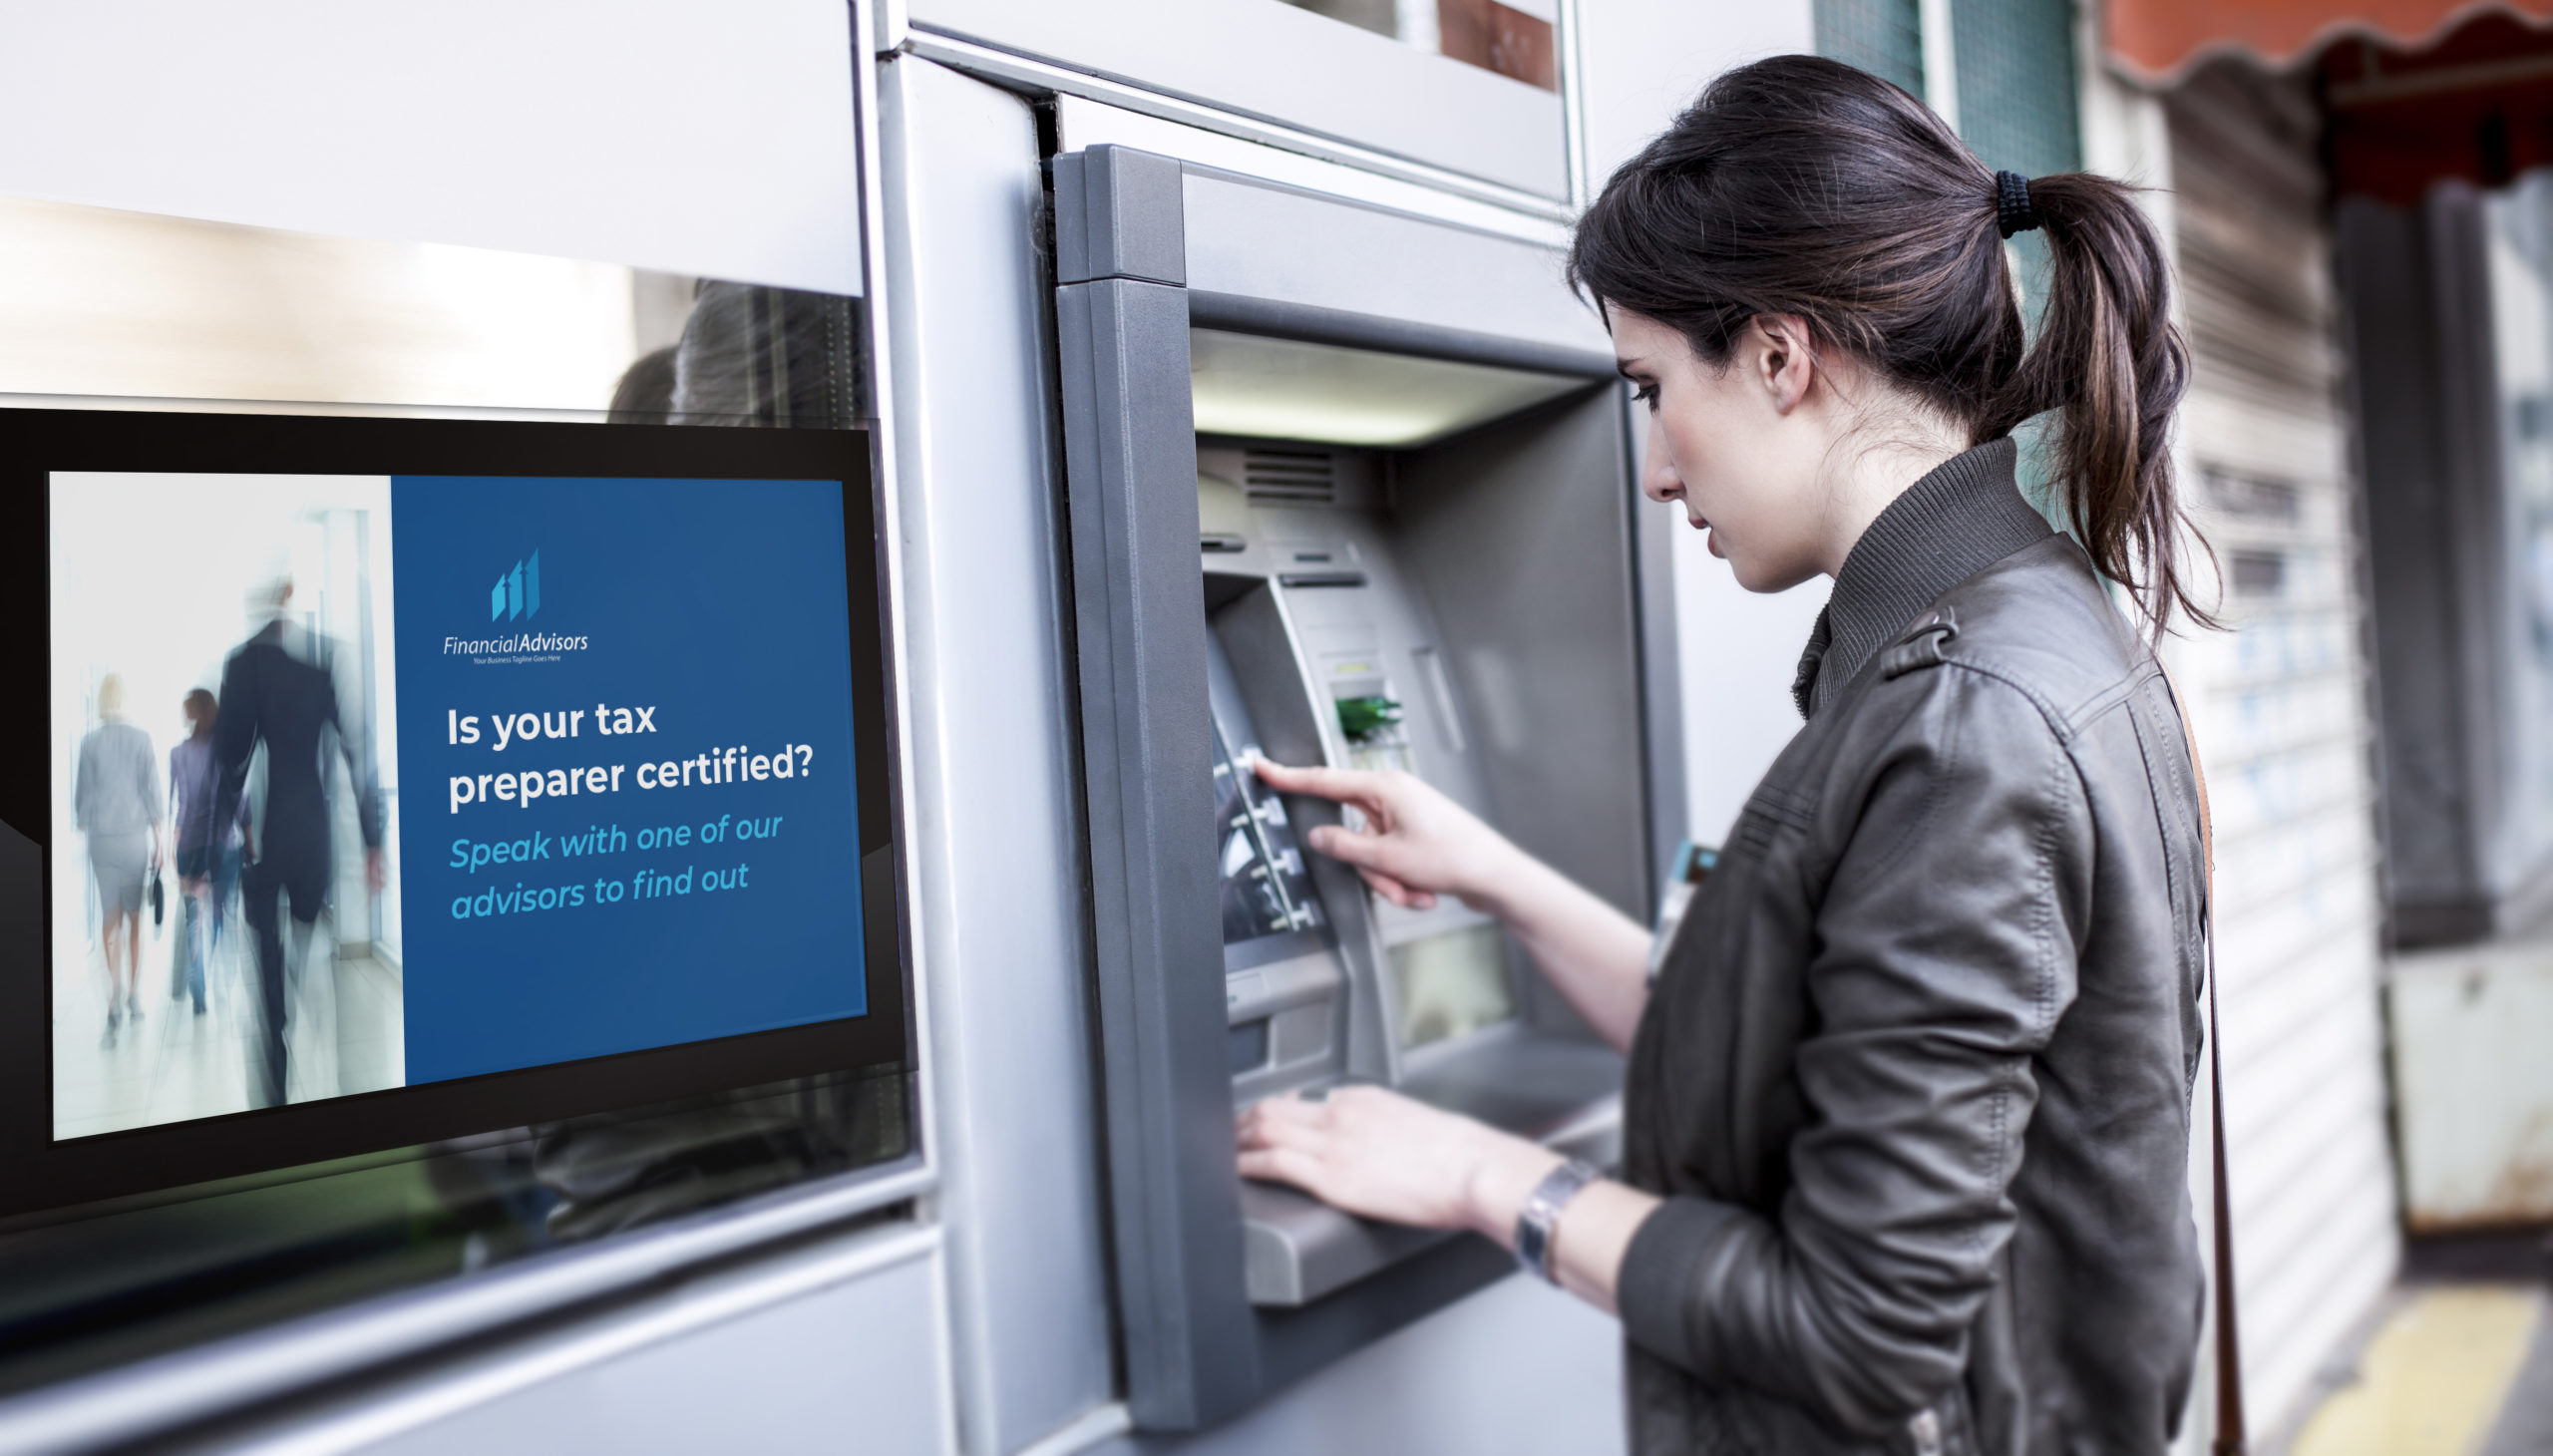 Young woman uses ATM with descriptive digital sign to her left